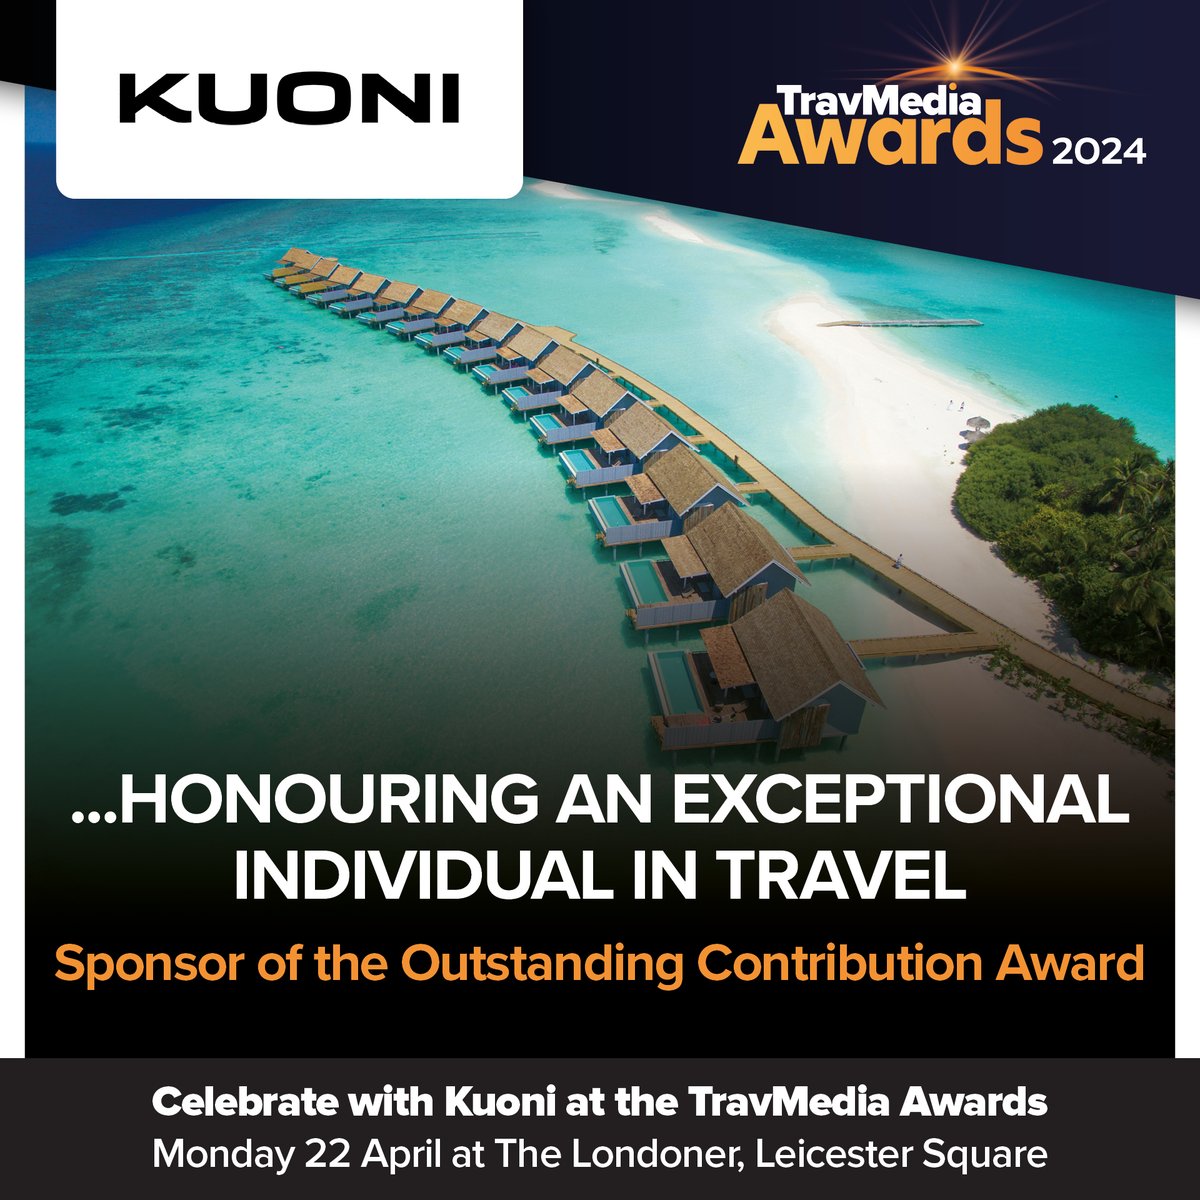 TravMedia Awards 2024: Meet the Sponsors With a legacy of setting the bar in luxury travel for over half a century, there's no one better positioned to recognise the exceptional individuals who have helped to propel our beloved industry forward. Our heartfelt gratitude to Kuoni…